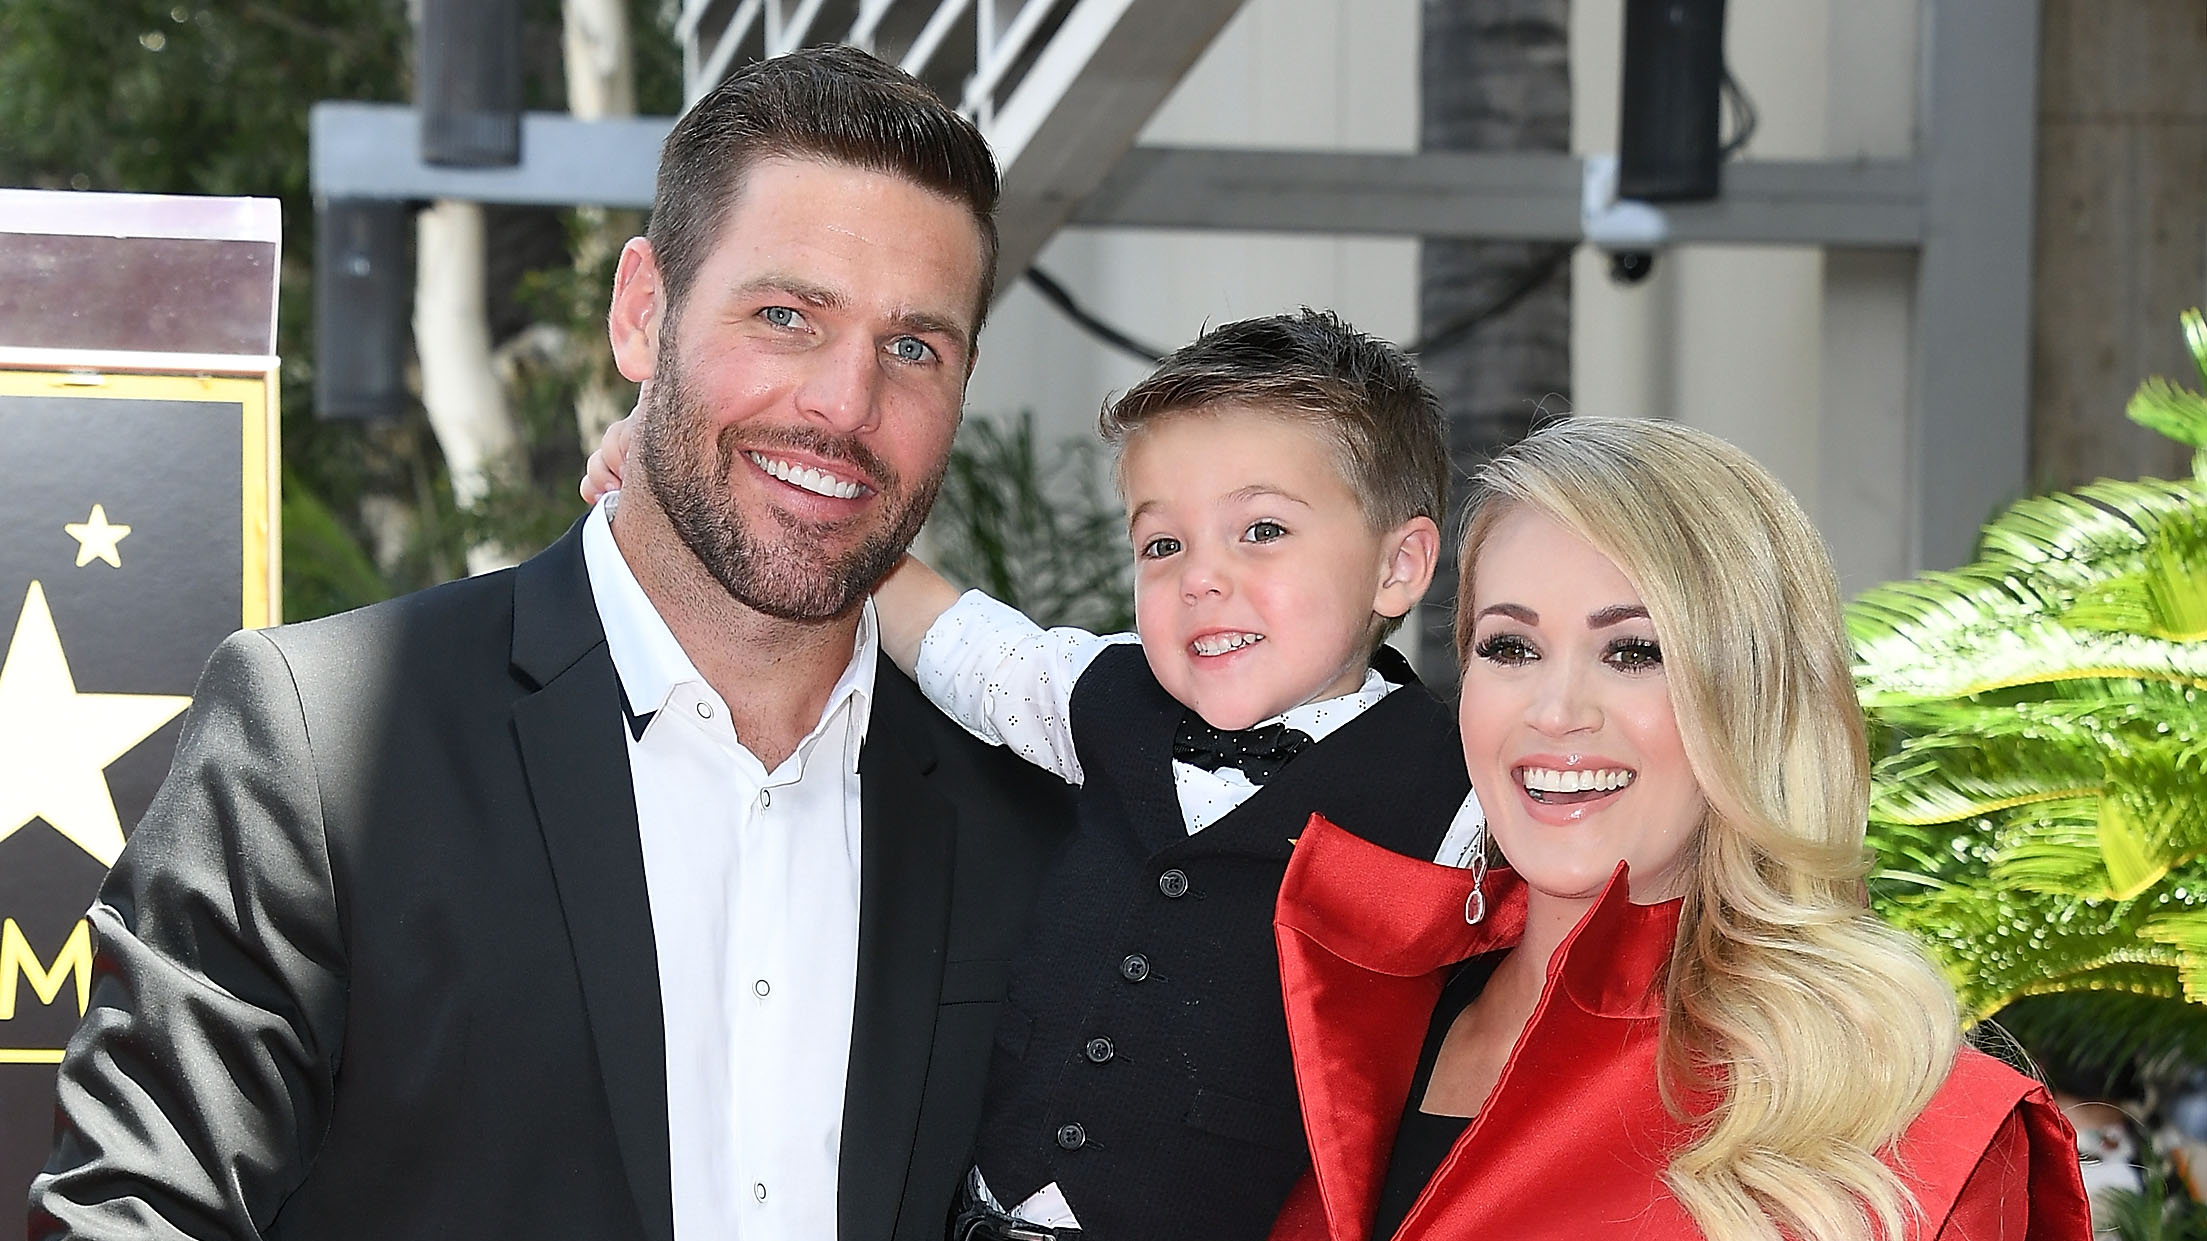 LOL, Carrie Underwood's 3-Year-Old Says Dad “Could Have That Baby